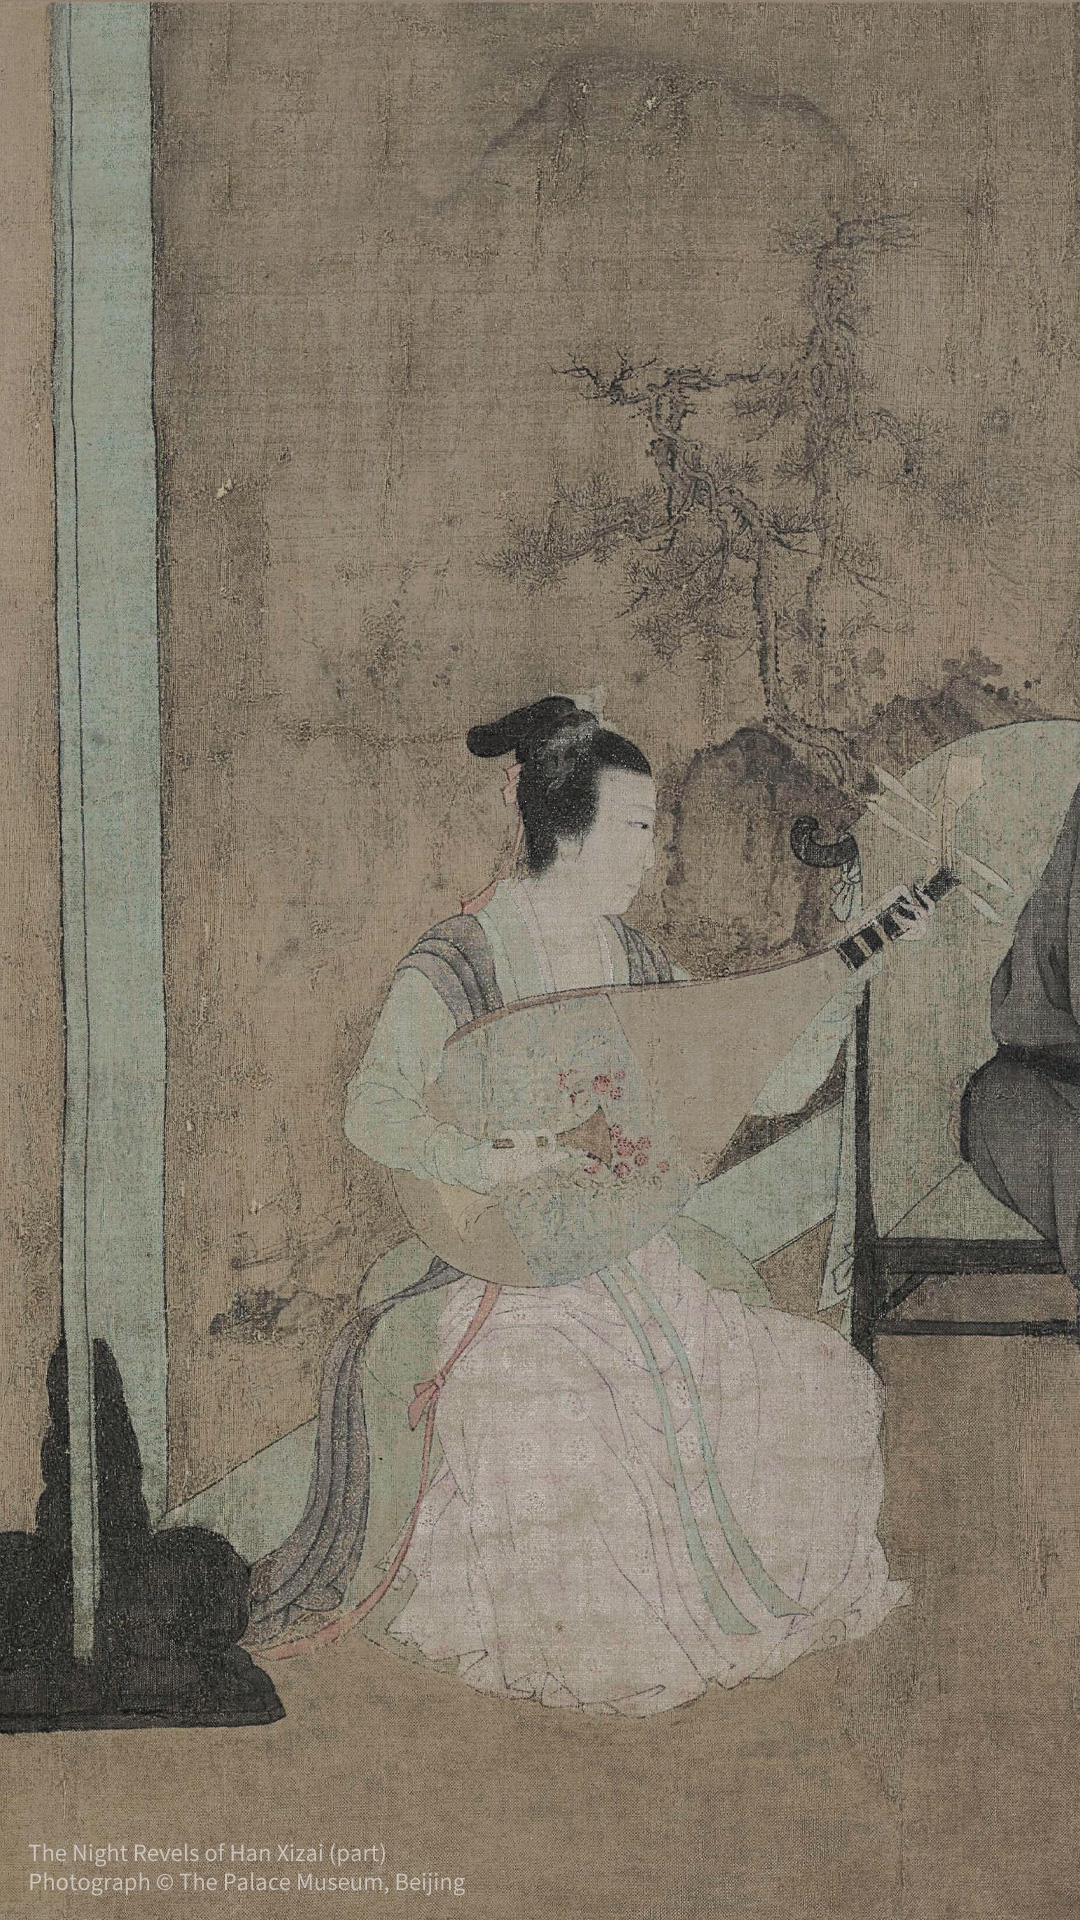 How did the performances look like in the Song Dynasty?